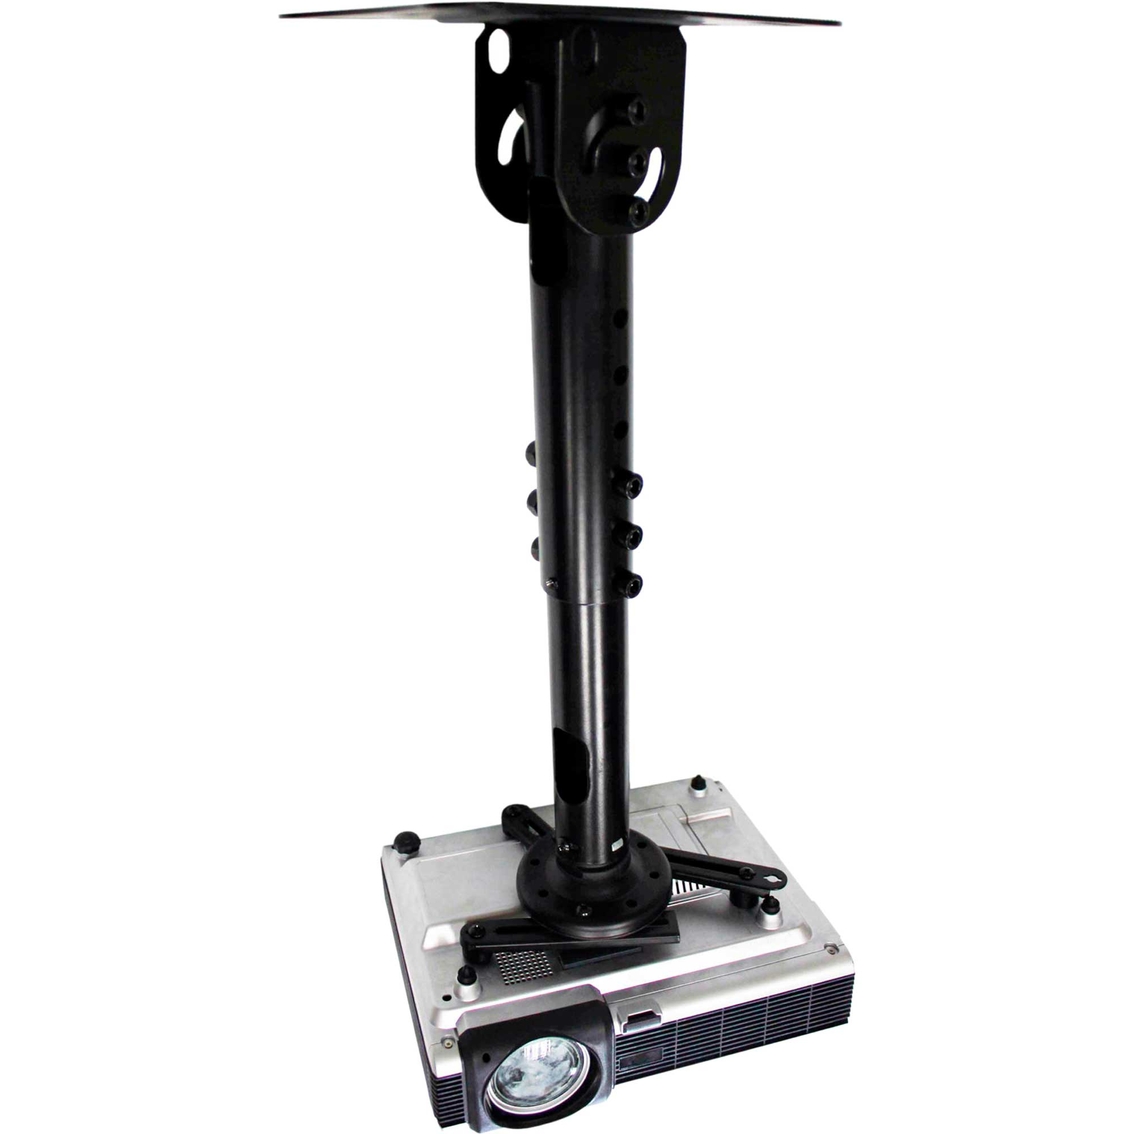 Kanto P301 Universal Projector Mount for Sloped Ceilings - Image 5 of 5